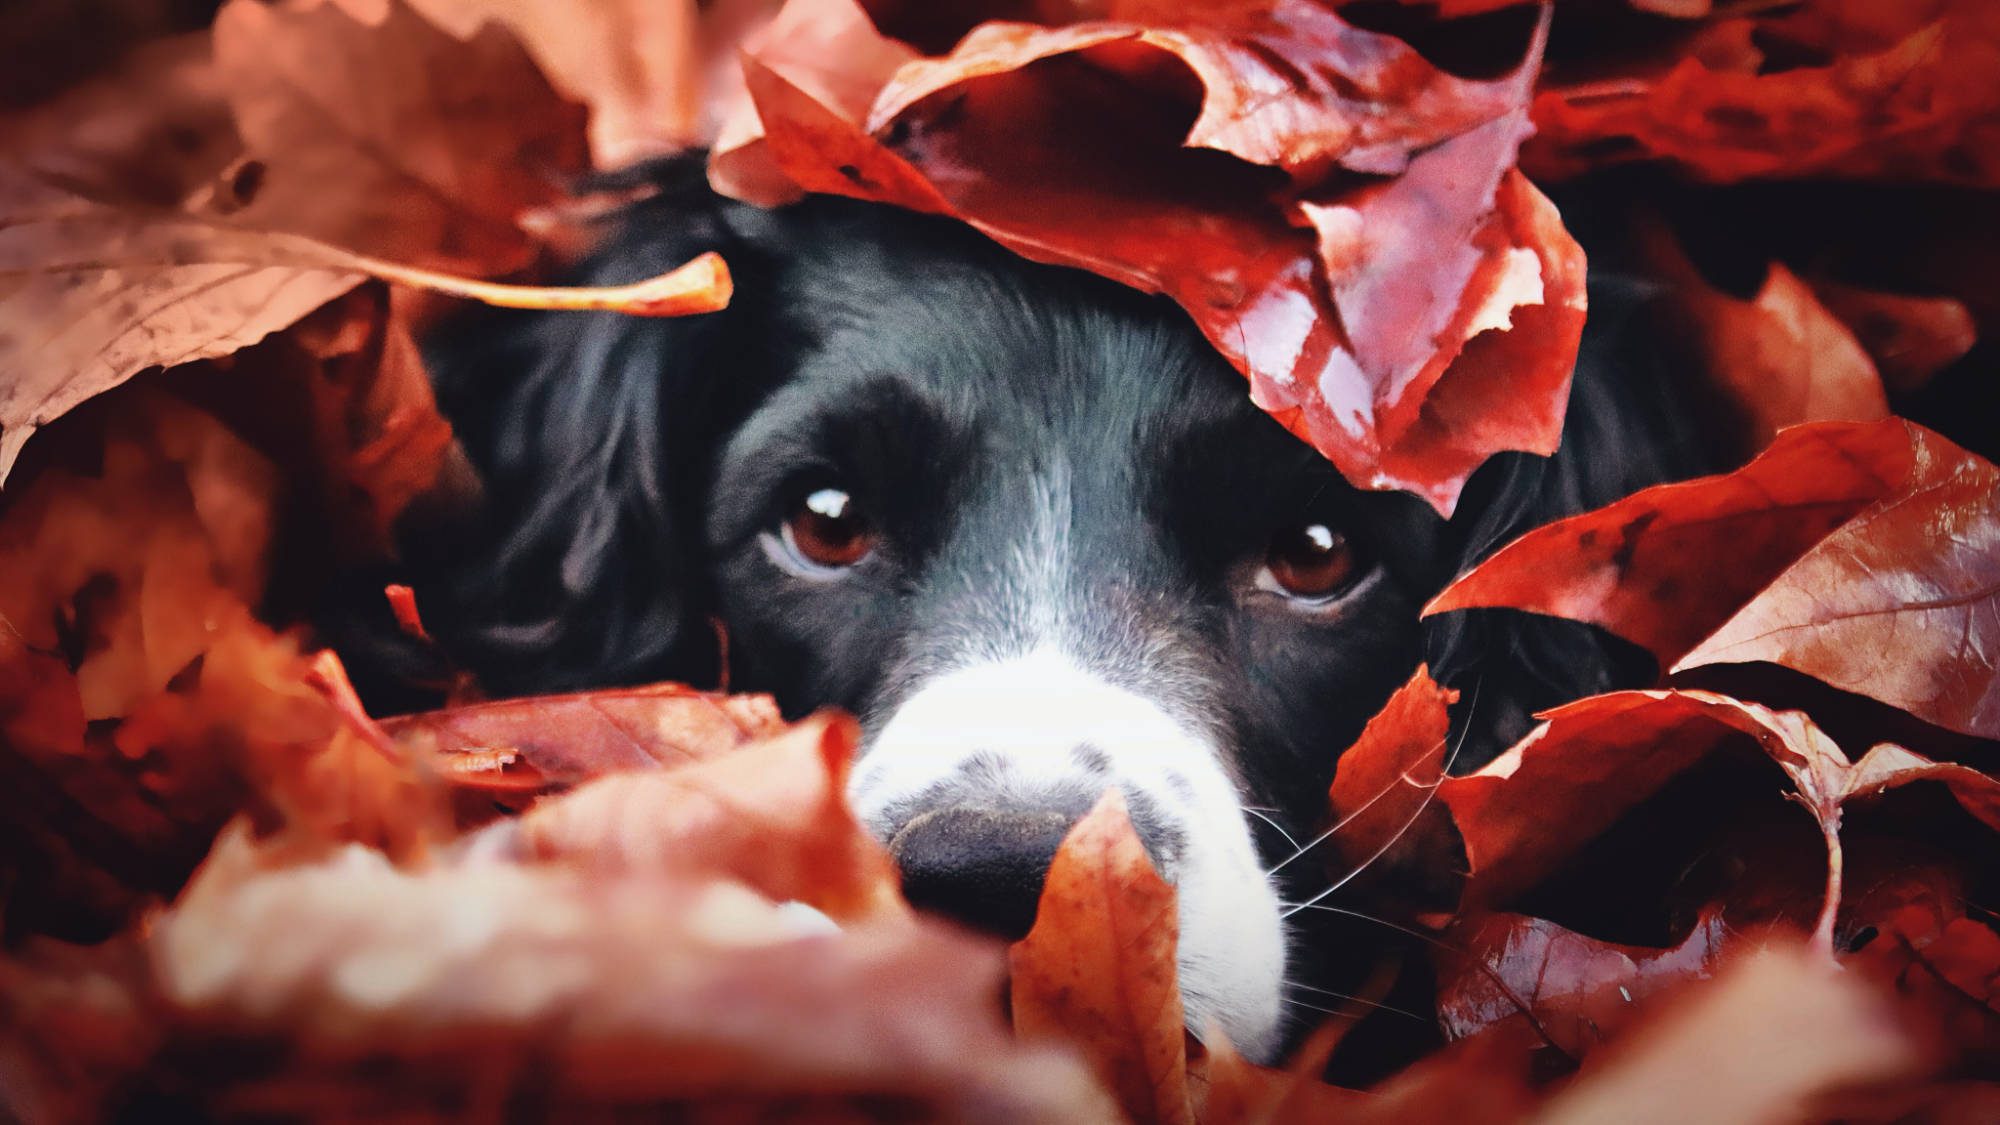 Dog hiding under a pile of leaves